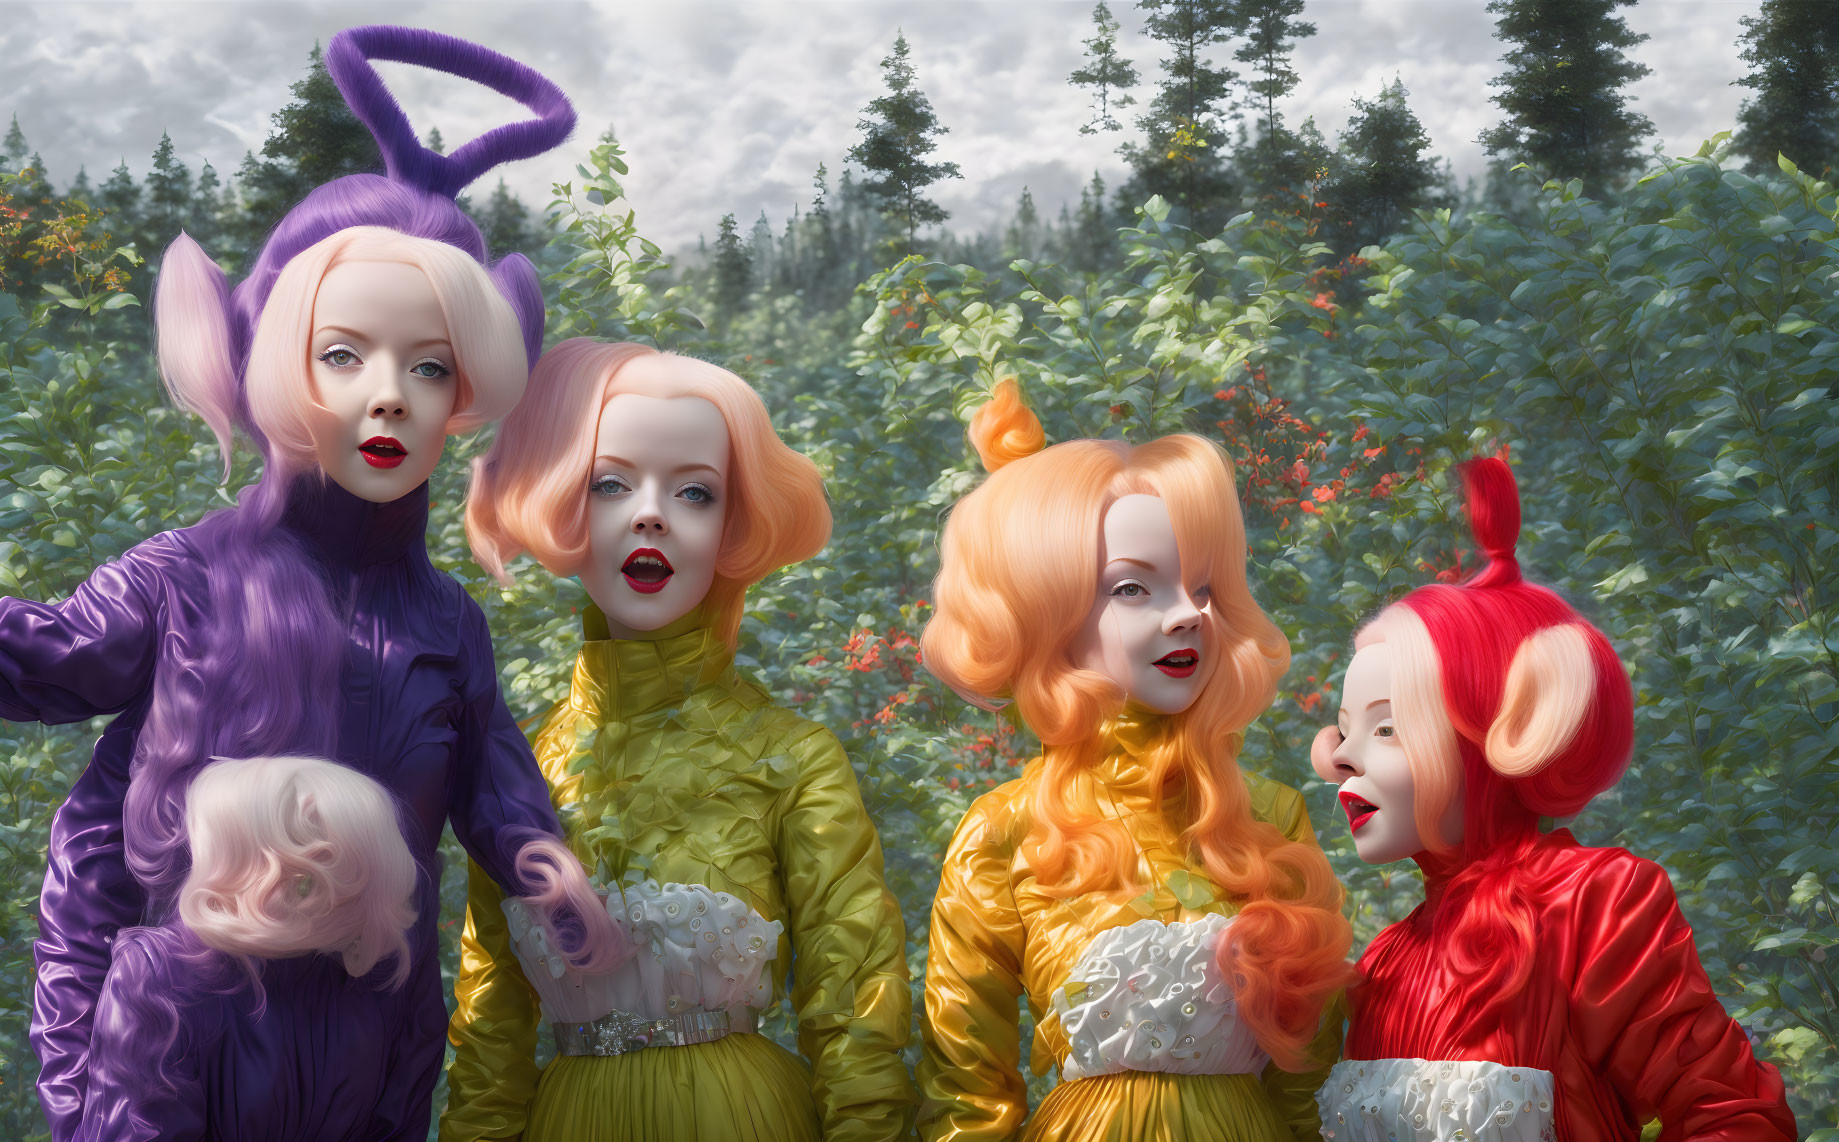 Four women in colorful costumes with oversized stylized heads in whimsical forest.